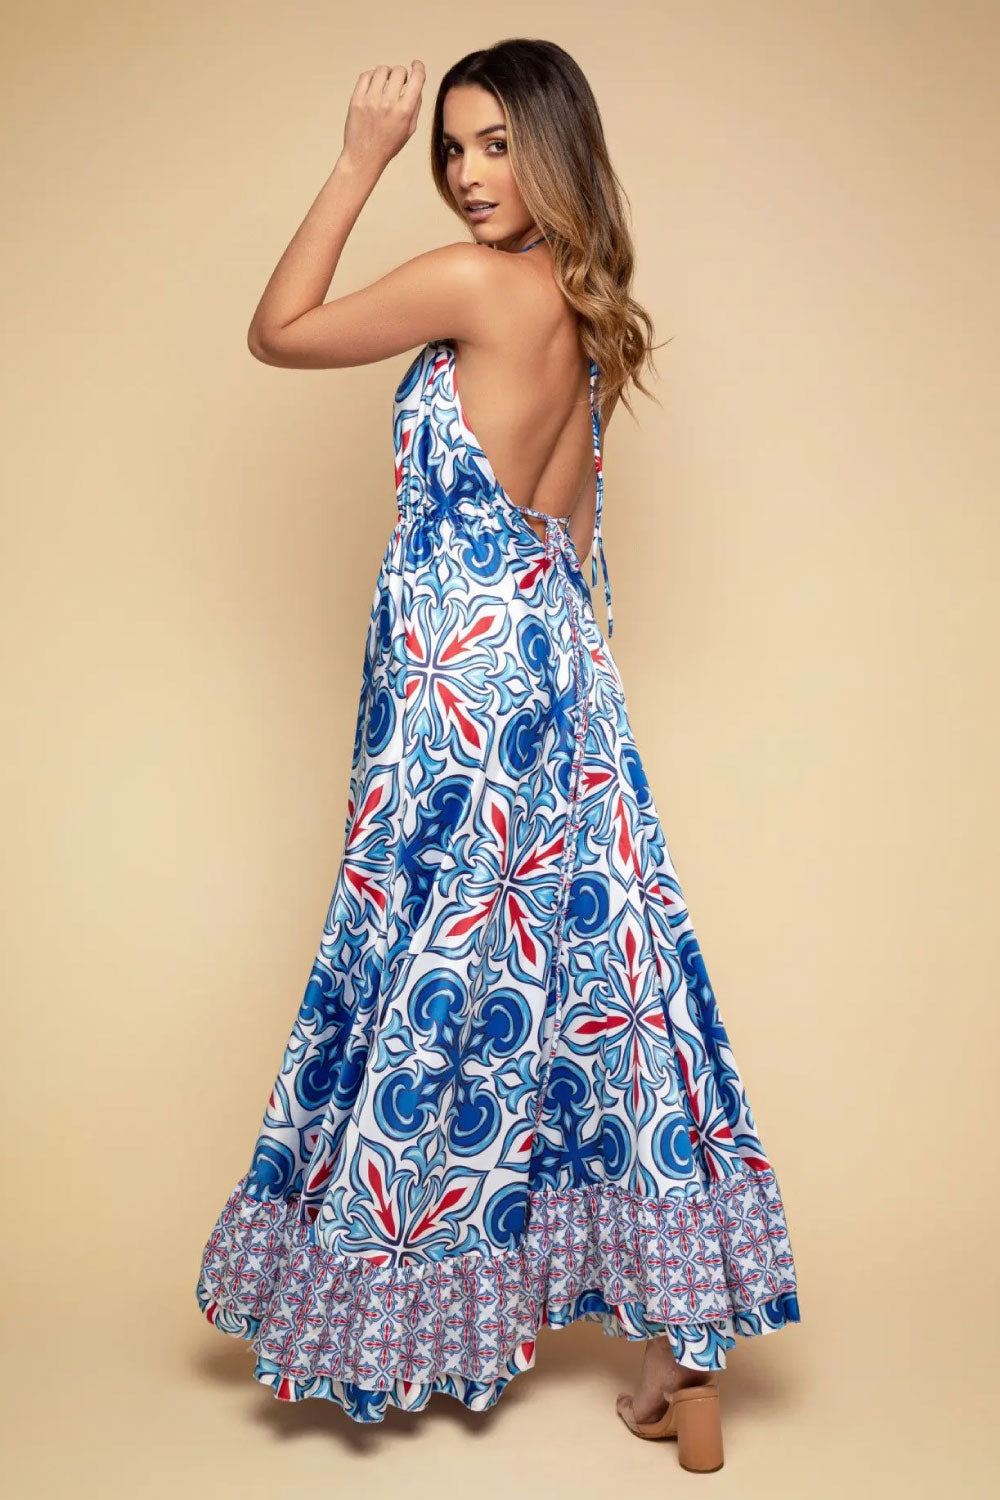 Image of the back of Mar A Mar's Barroco Dress on a model.